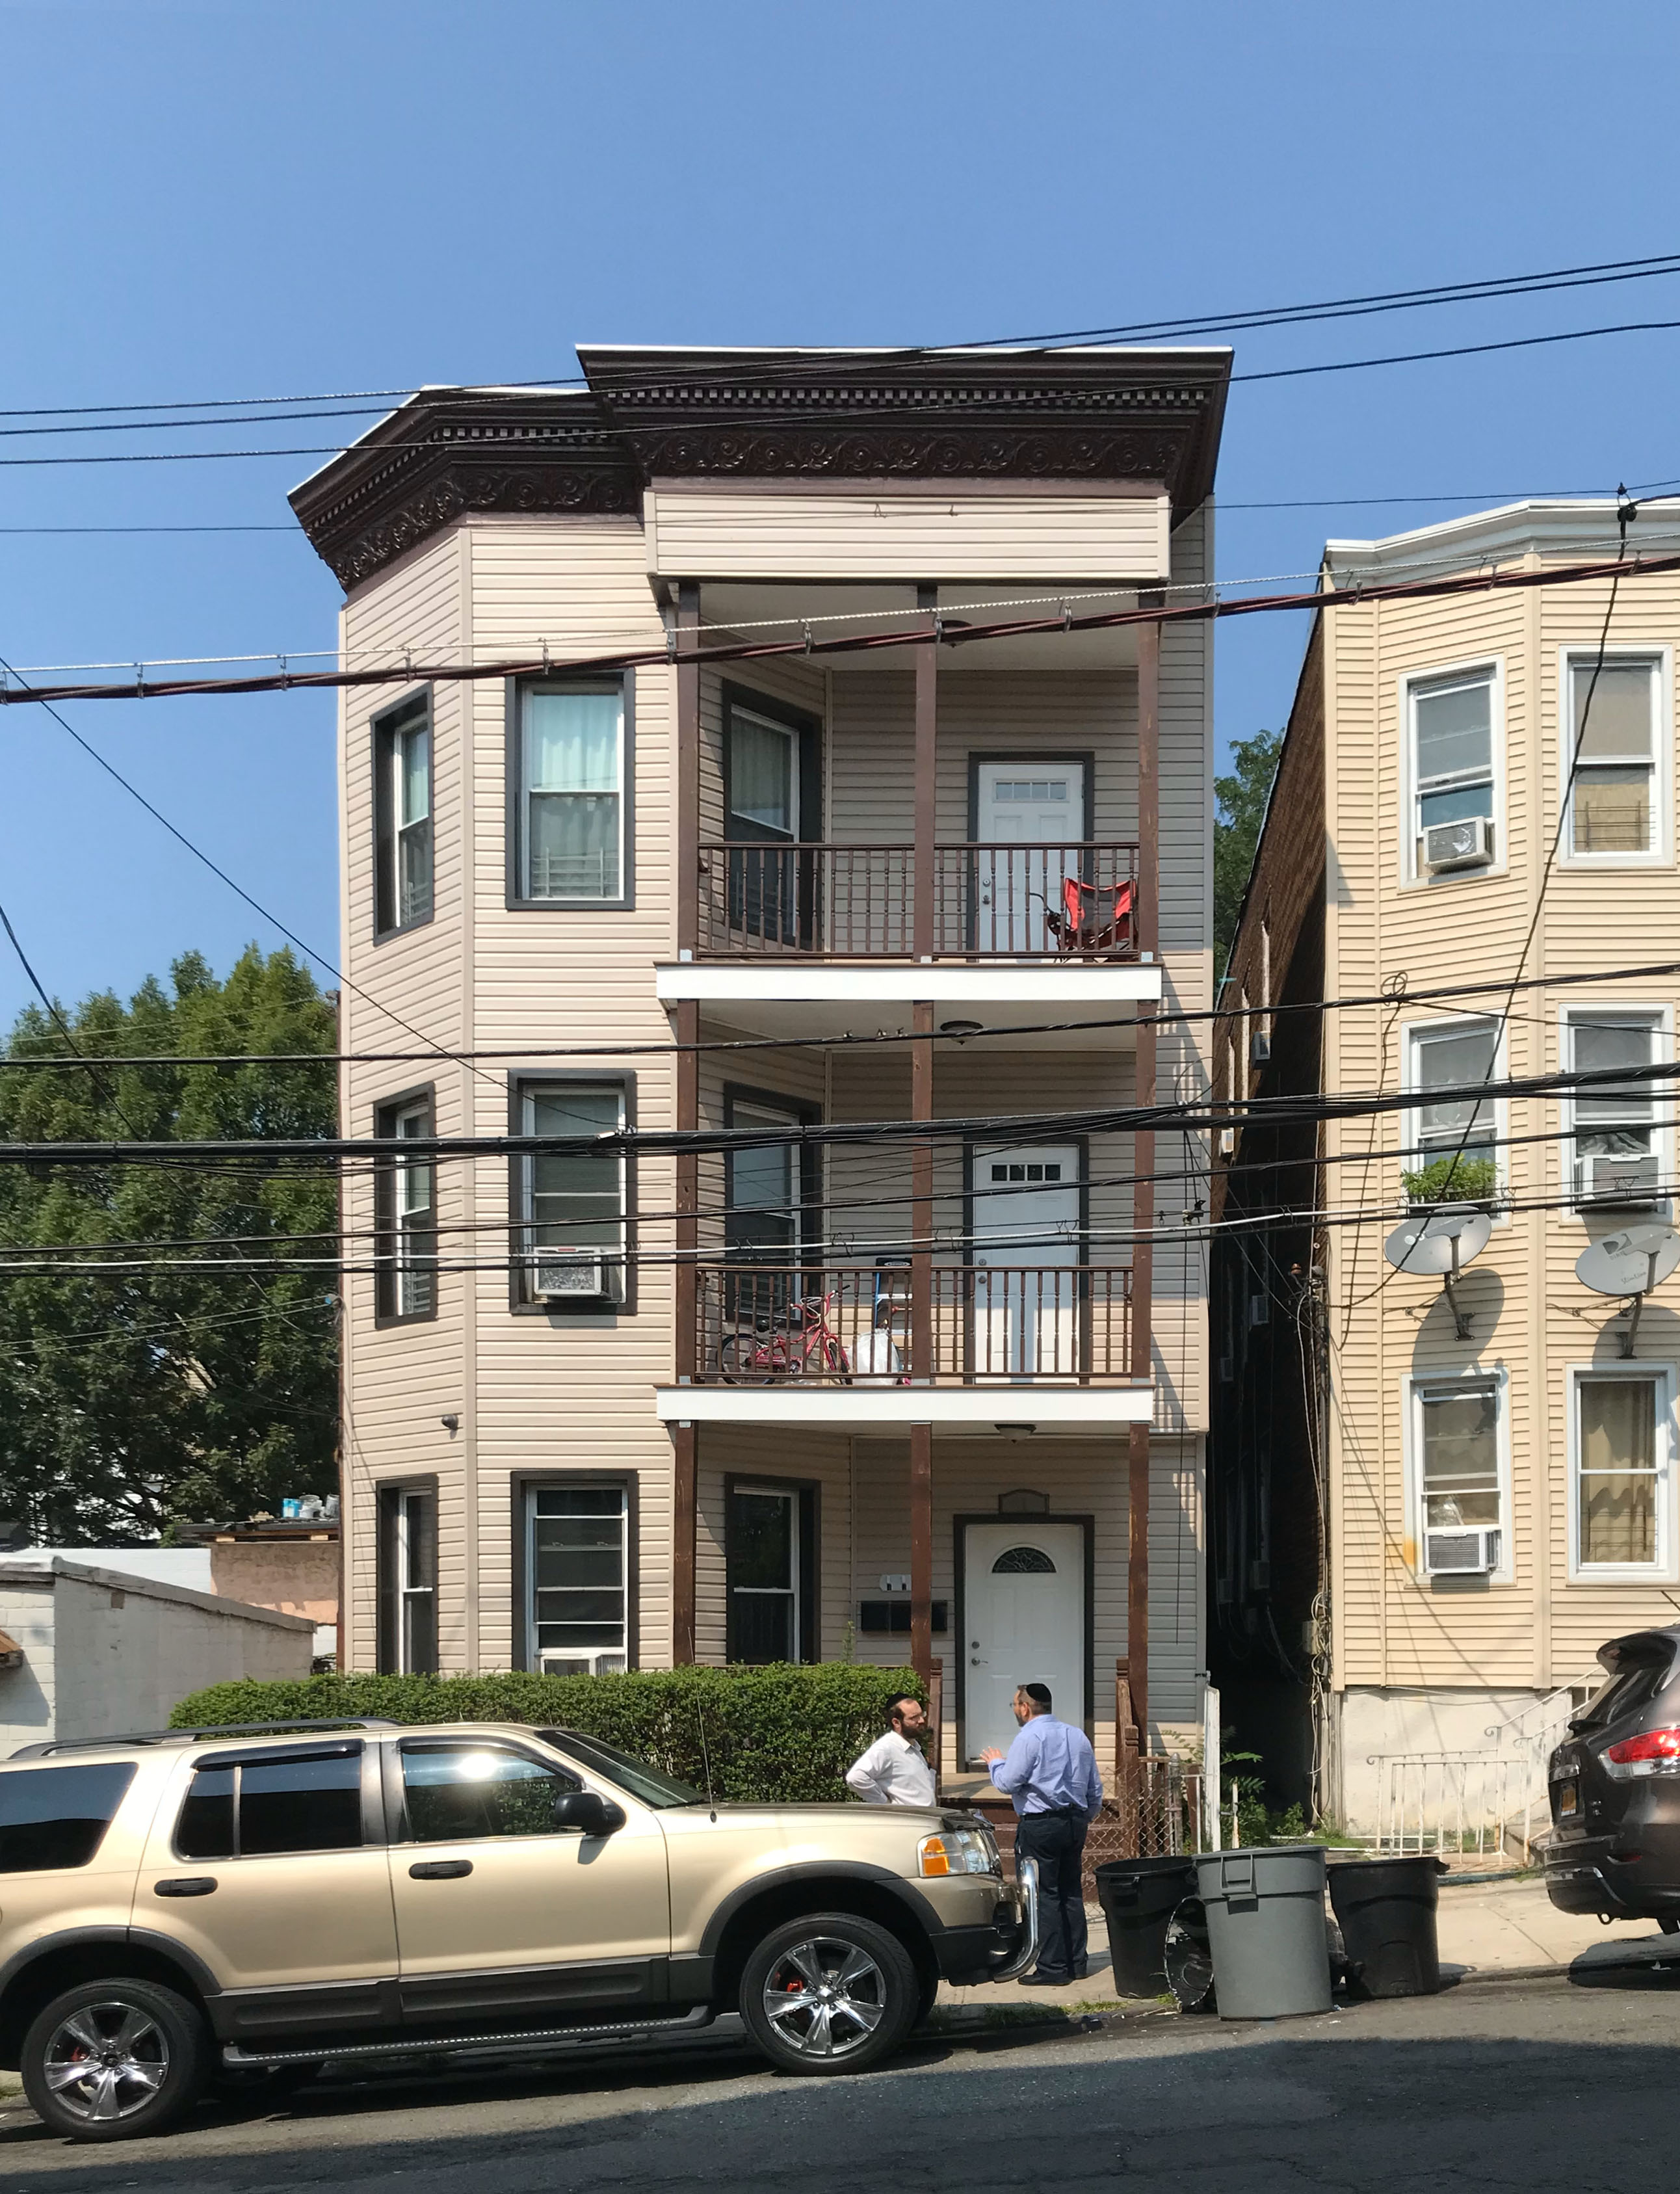 LichtensteinRE.com Sold a 3 Unit Multifamily Property in Yonkers for $750,000